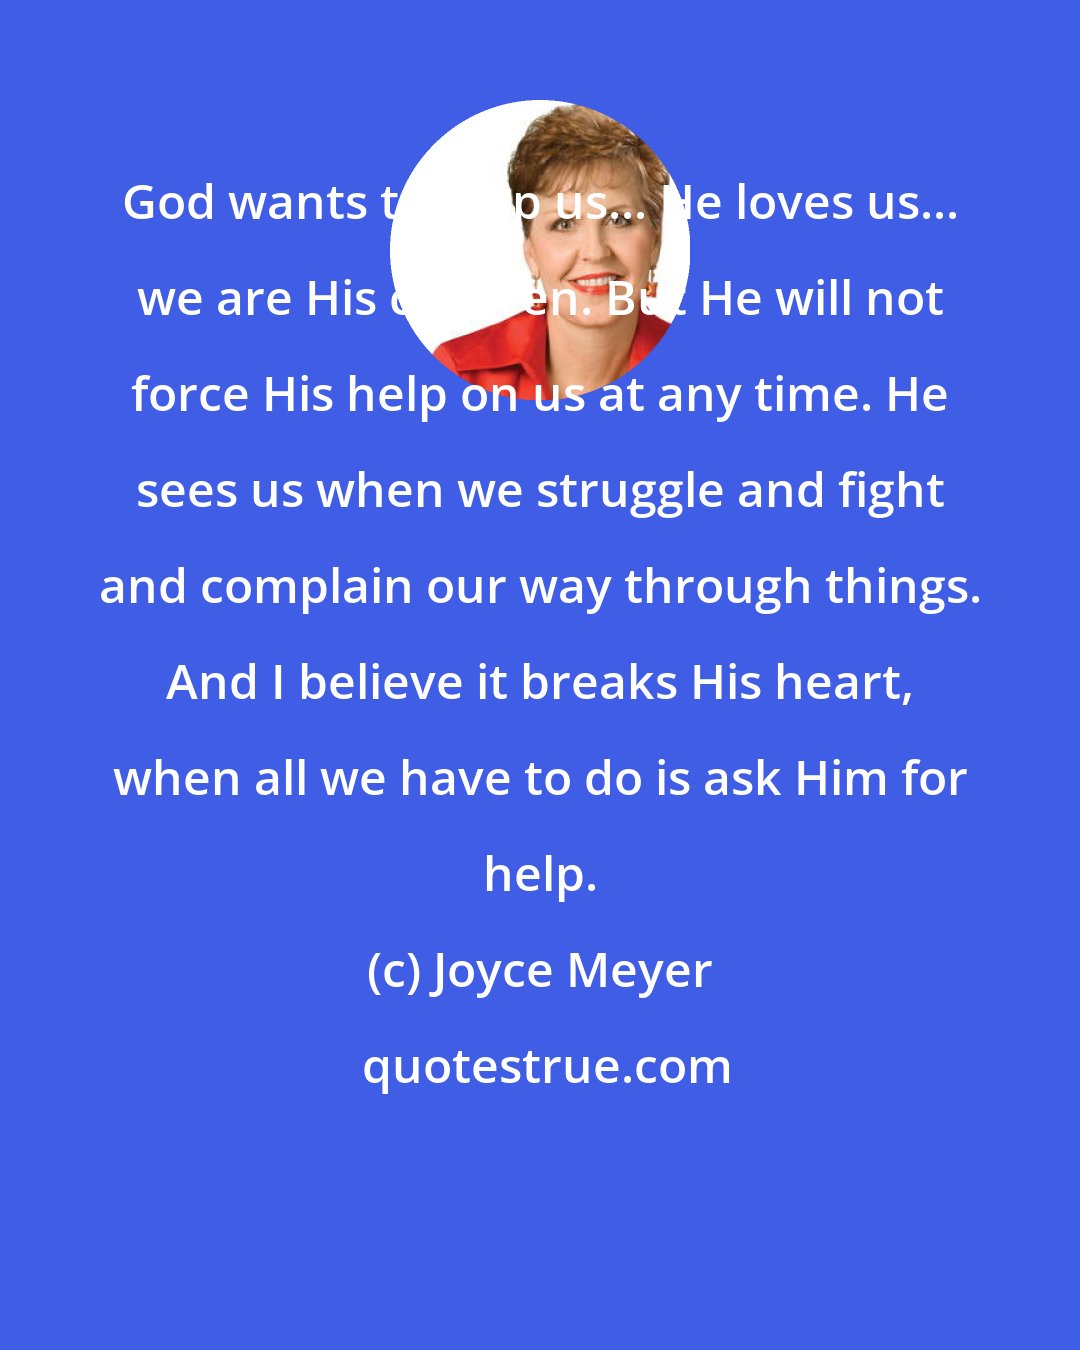 Joyce Meyer: God wants to help us... He loves us... we are His children. But He will not force His help on us at any time. He sees us when we struggle and fight and complain our way through things. And I believe it breaks His heart, when all we have to do is ask Him for help.